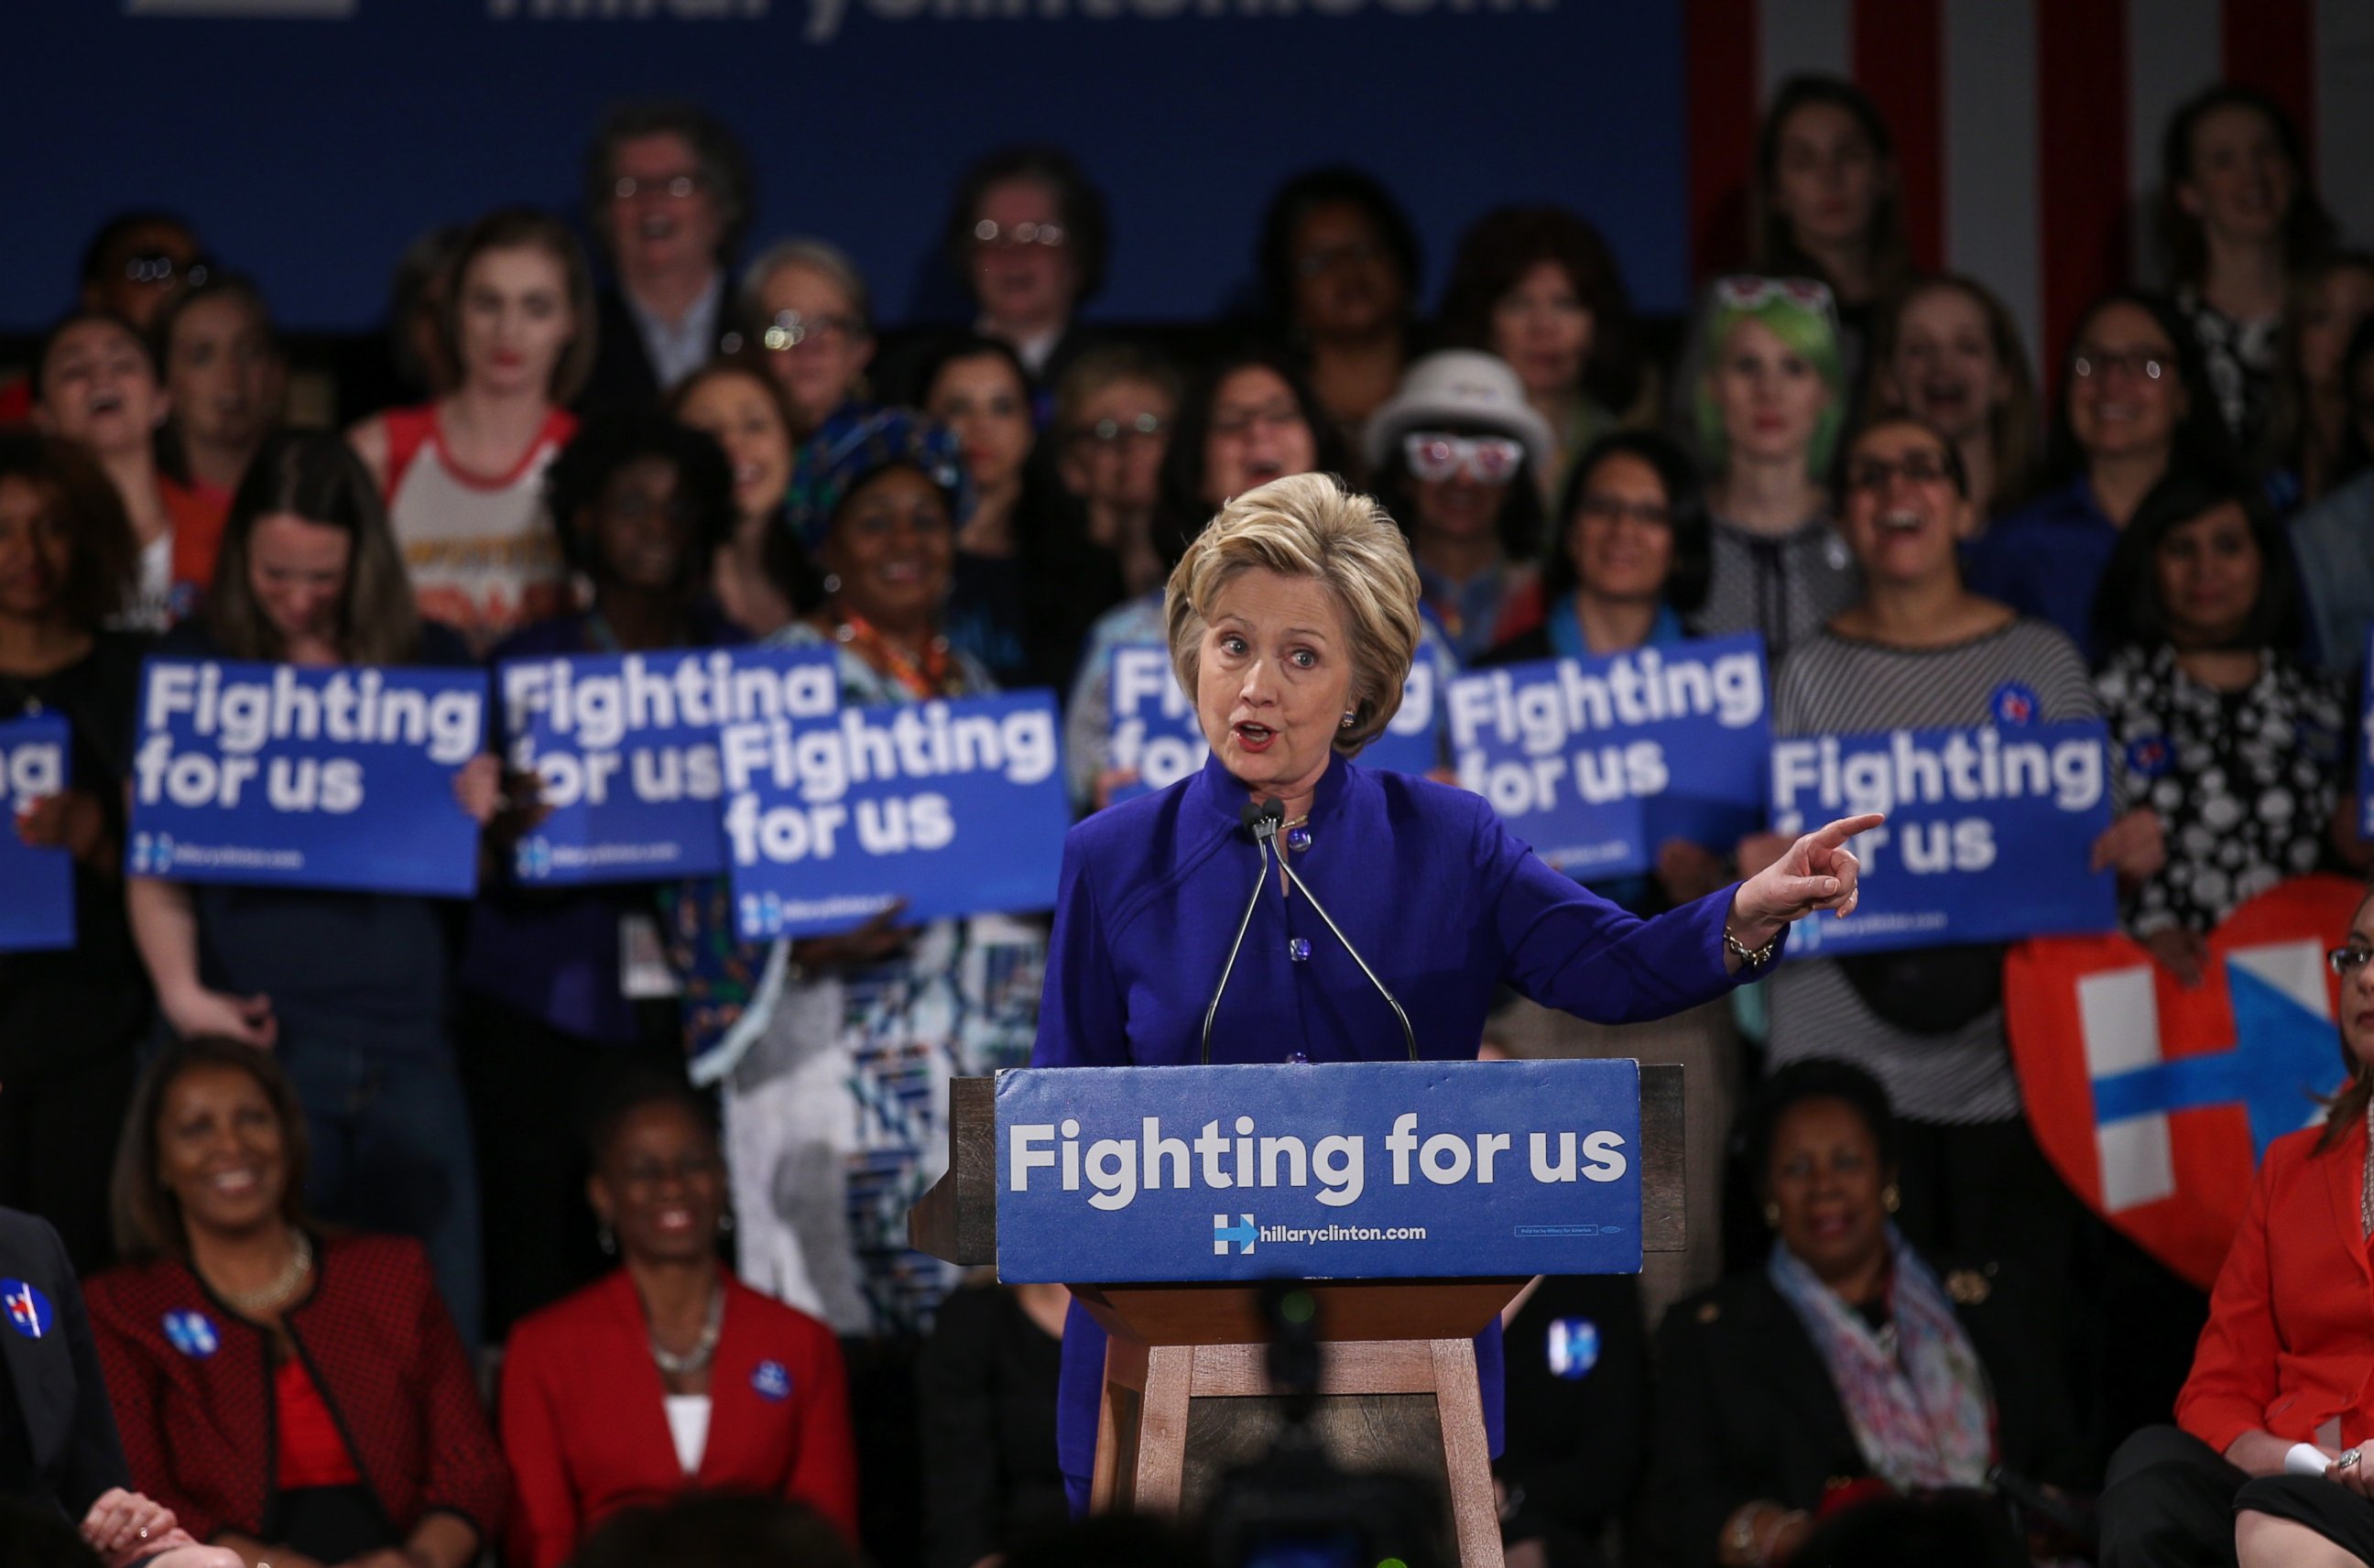 PHOTO:Democratic Presidential Candidate Hillary Clinton gives a speech as she meets with her supporters during a campaign rally themed "Women for Hillary" at Hilton Hotel in New York, April 18, 2016.  